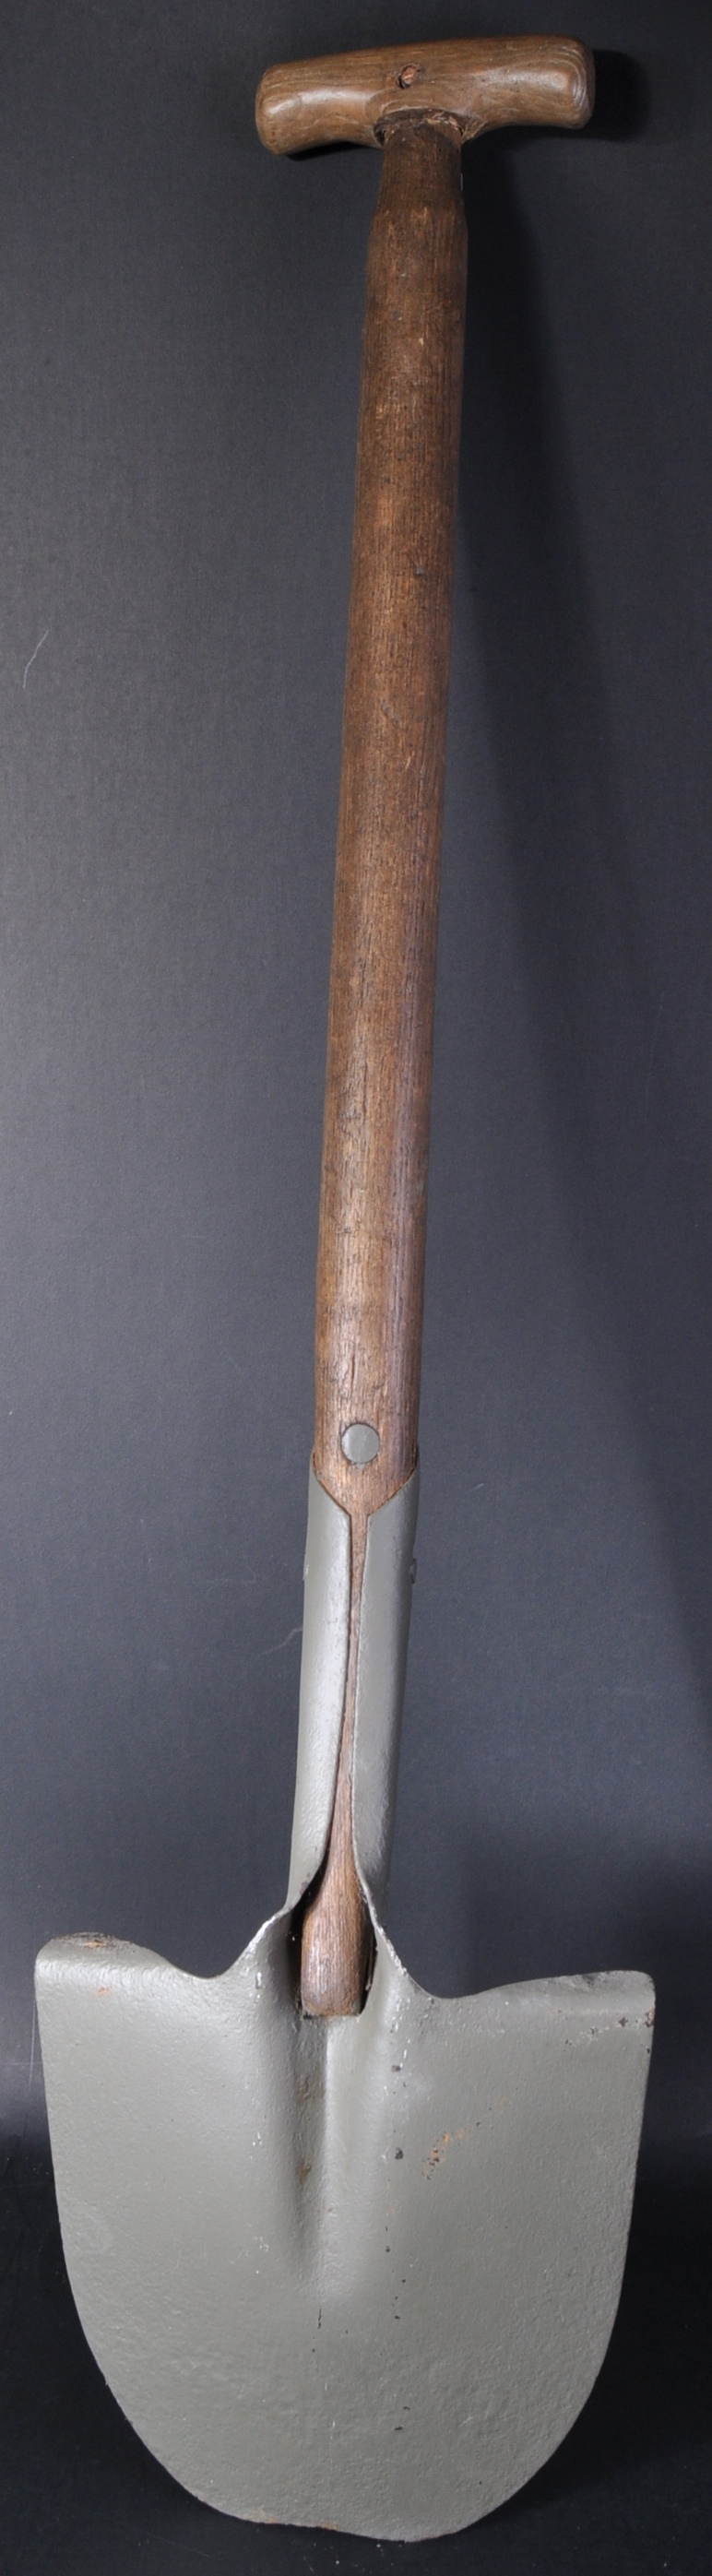 WWII SECOND WORLD WAR MILITARY TRENCHING SHOVEL - Image 6 of 6